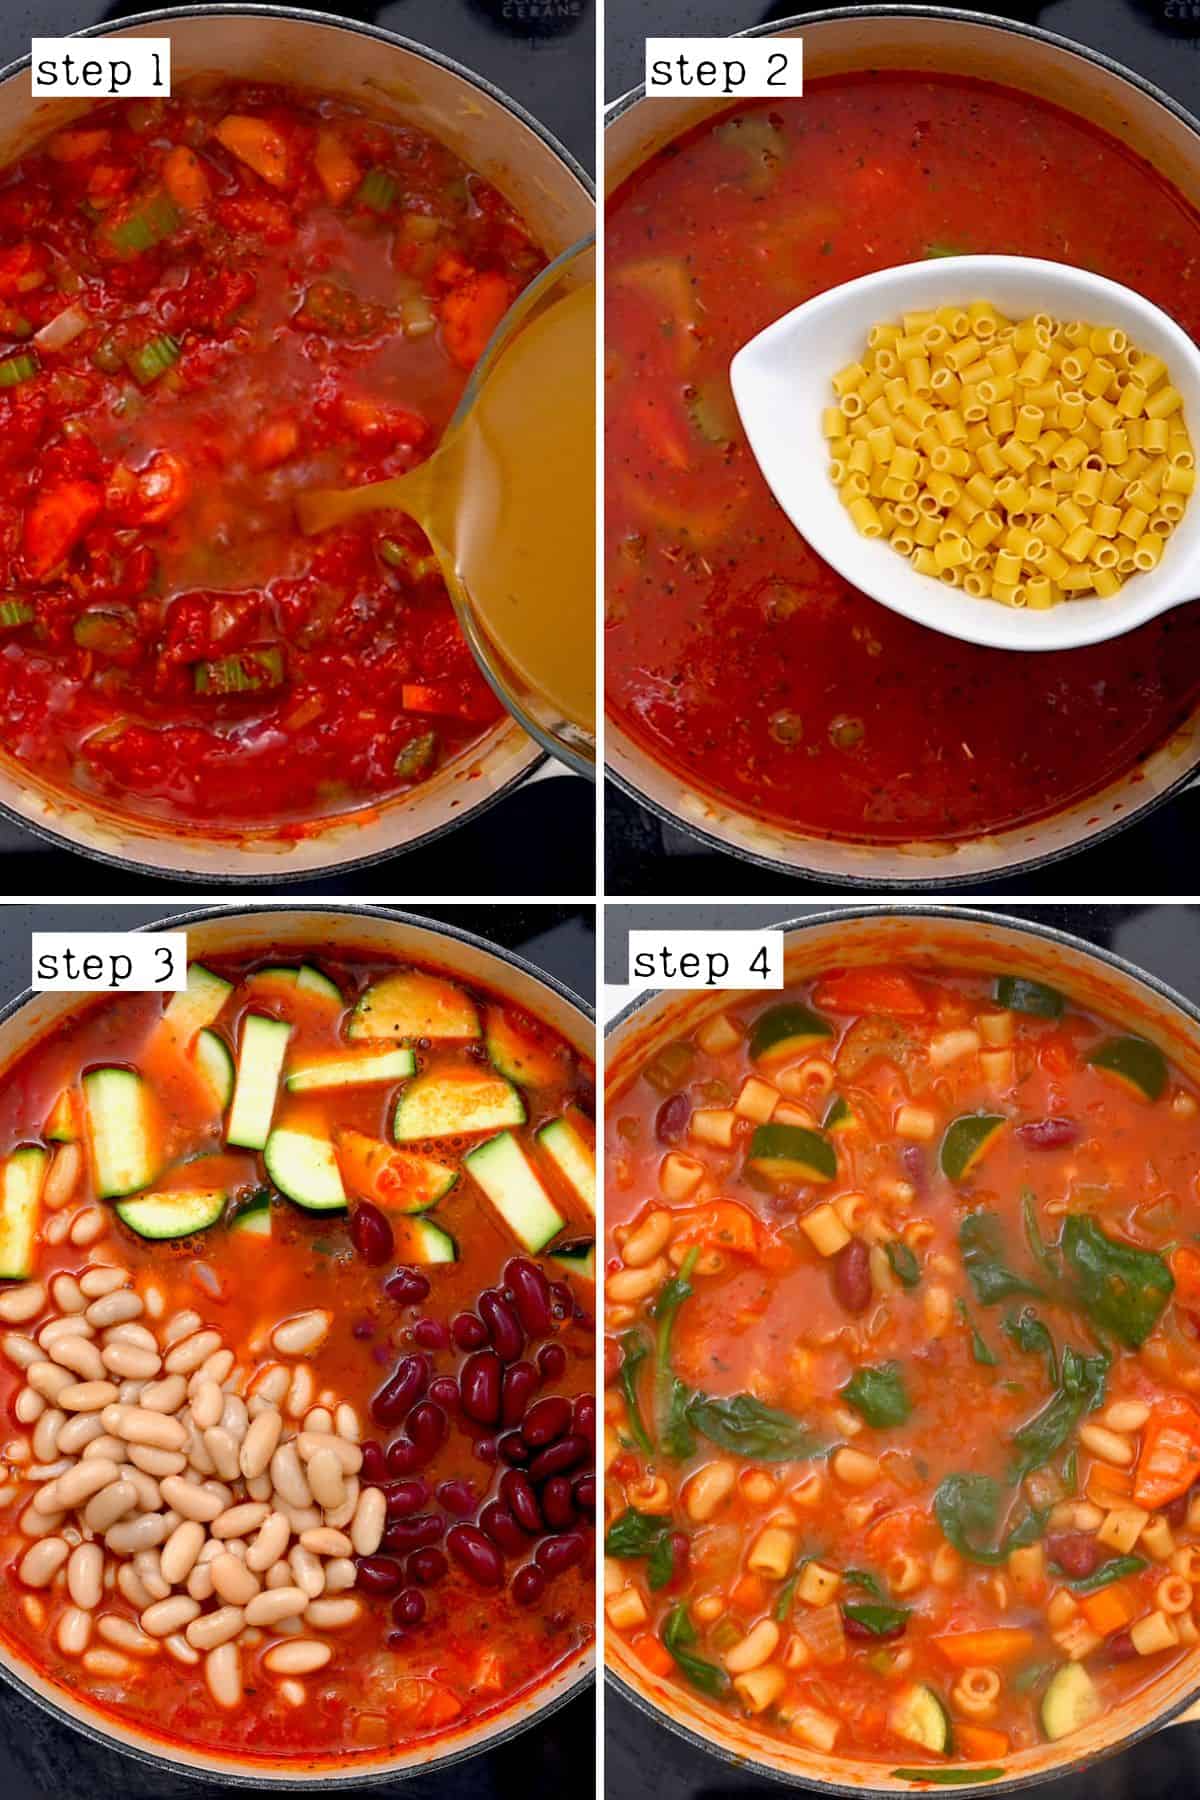 Steps for preparing minestrone soup